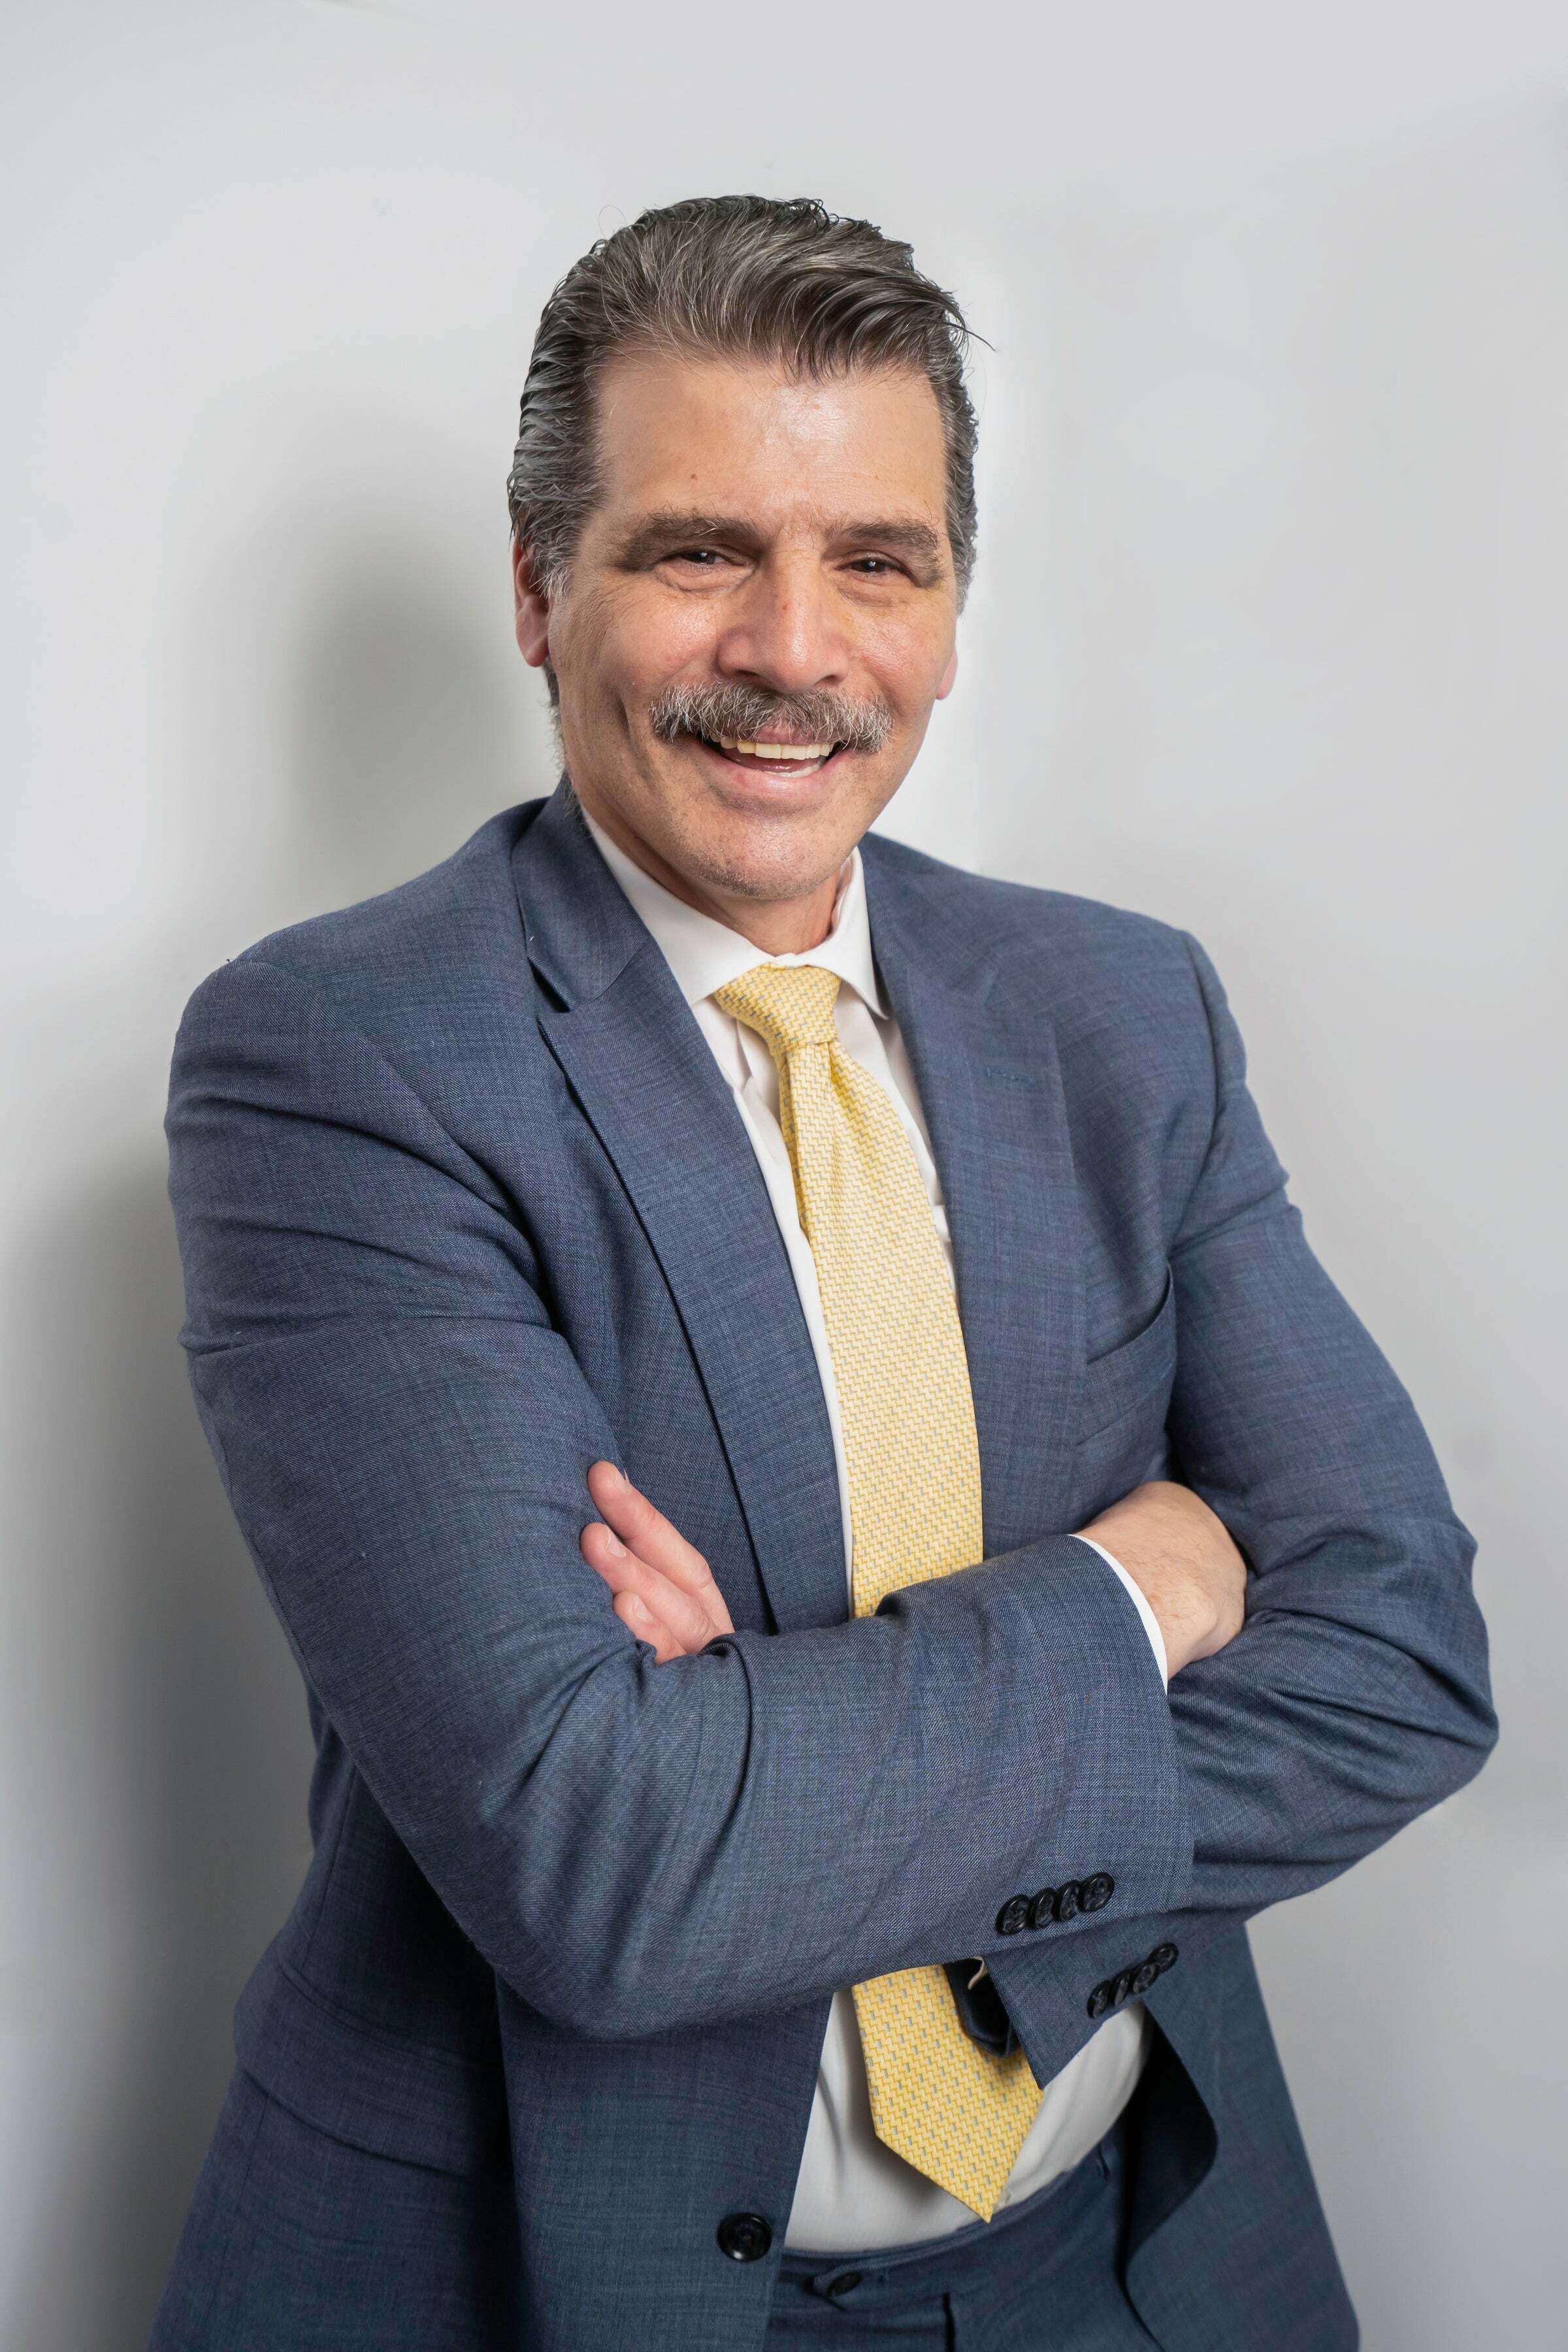 Michael D'Onofrio, Associate Real Estate Broker in White Plains, ERA Insite Realty Services